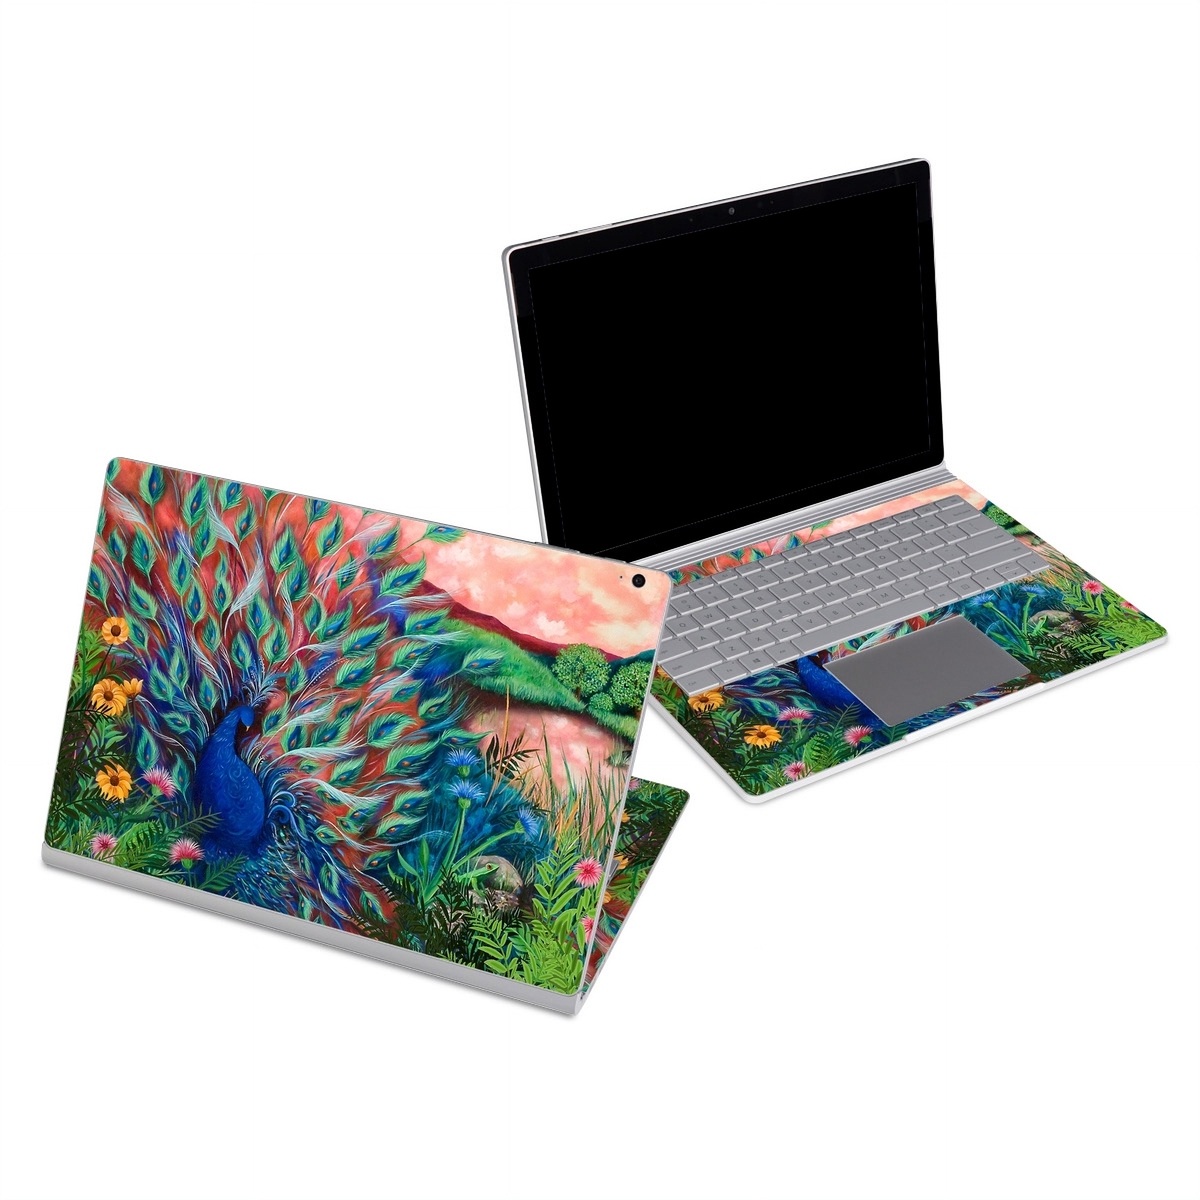 Microsoft Surface Book Series Skin design of Painting, Acrylic paint, Bird, Child art, Art, Galliformes, Peafowl, Visual arts, Watercolor paint, Plant, with black, red, gray, blue, green colors